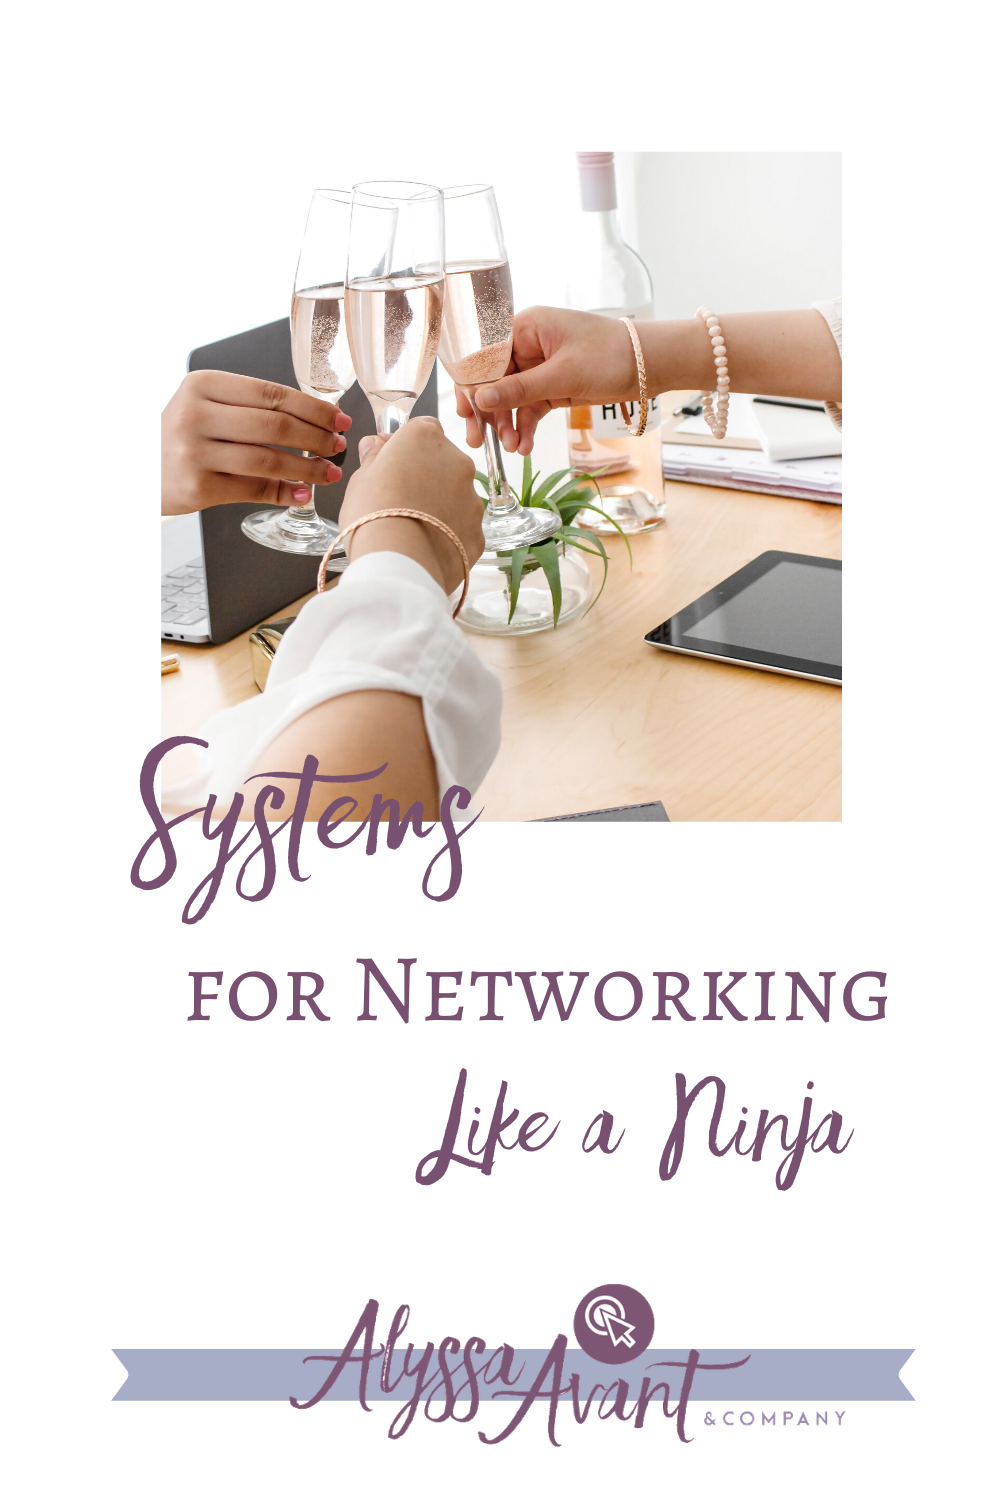 Systems for Networking Like a Ninja